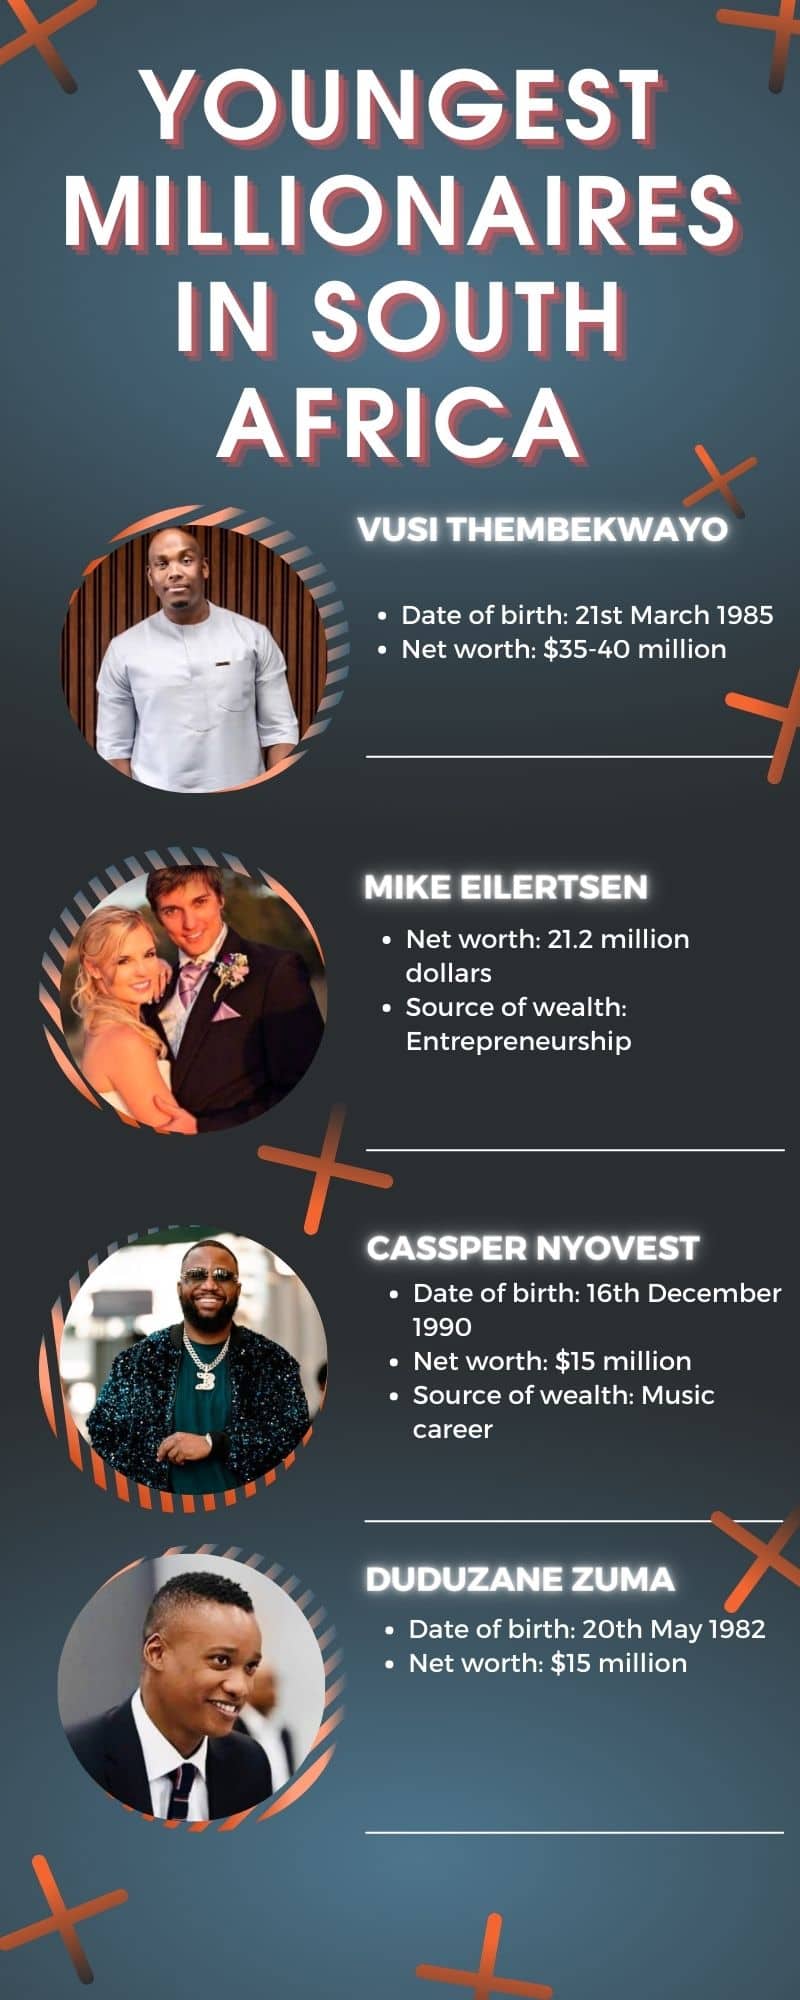 Youngest millionaires in South Africa